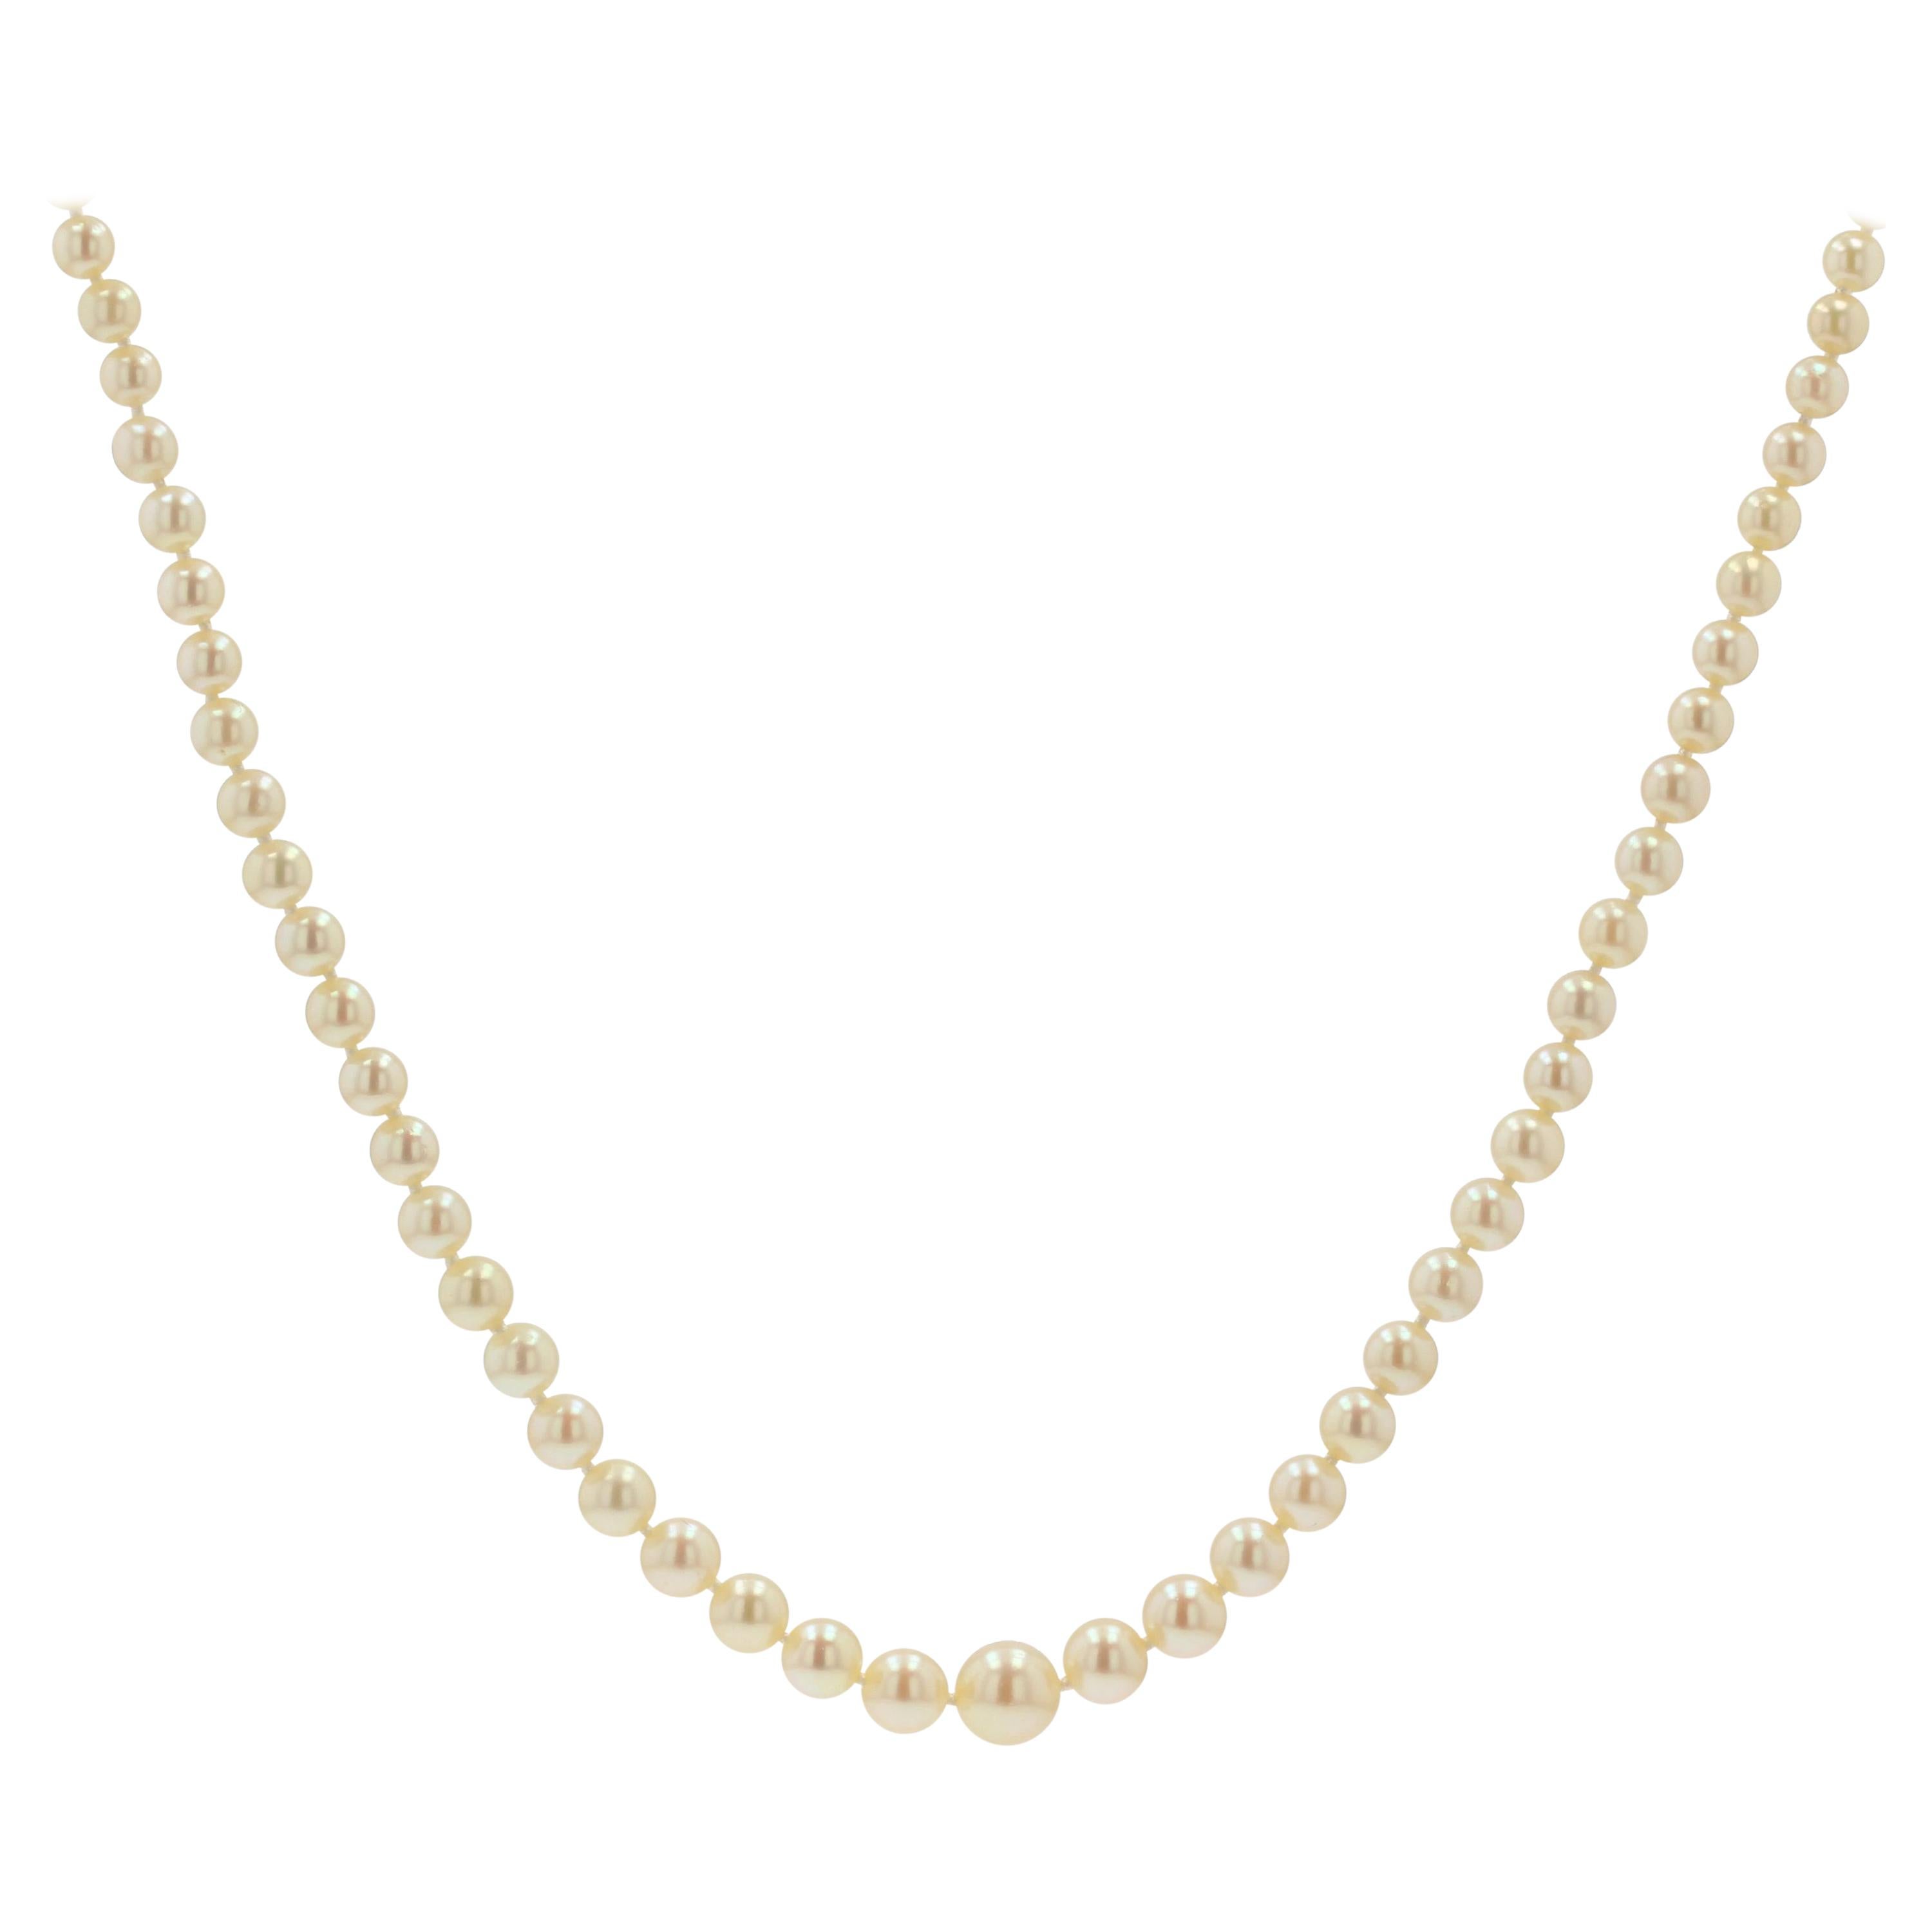 1930s Japanese Cultured Round White Pearl Necklace